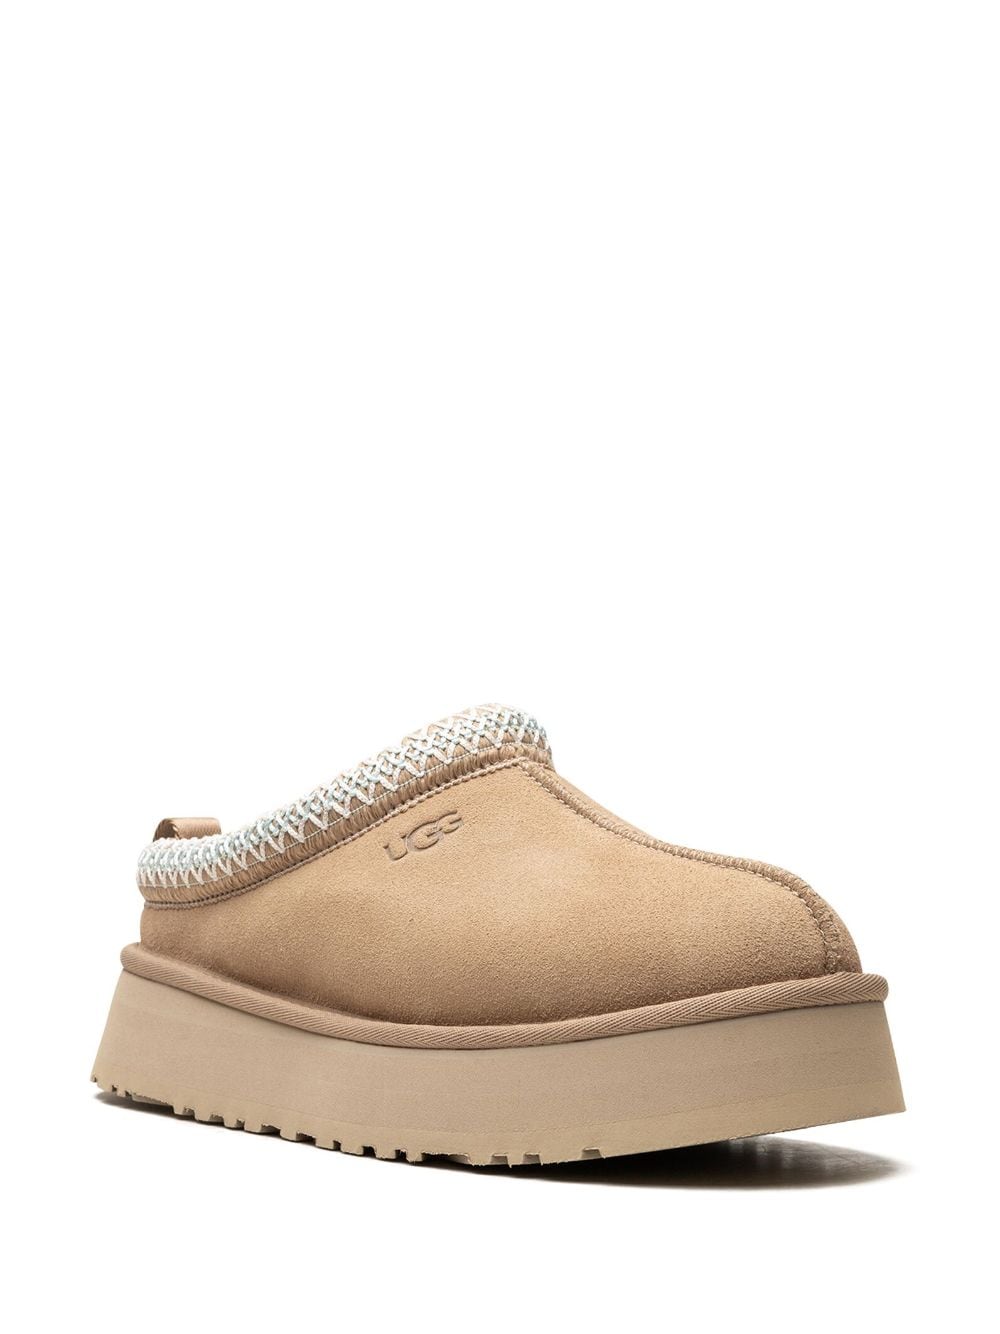 Shop Ugg Tazz "sand" Sneakers In Nude